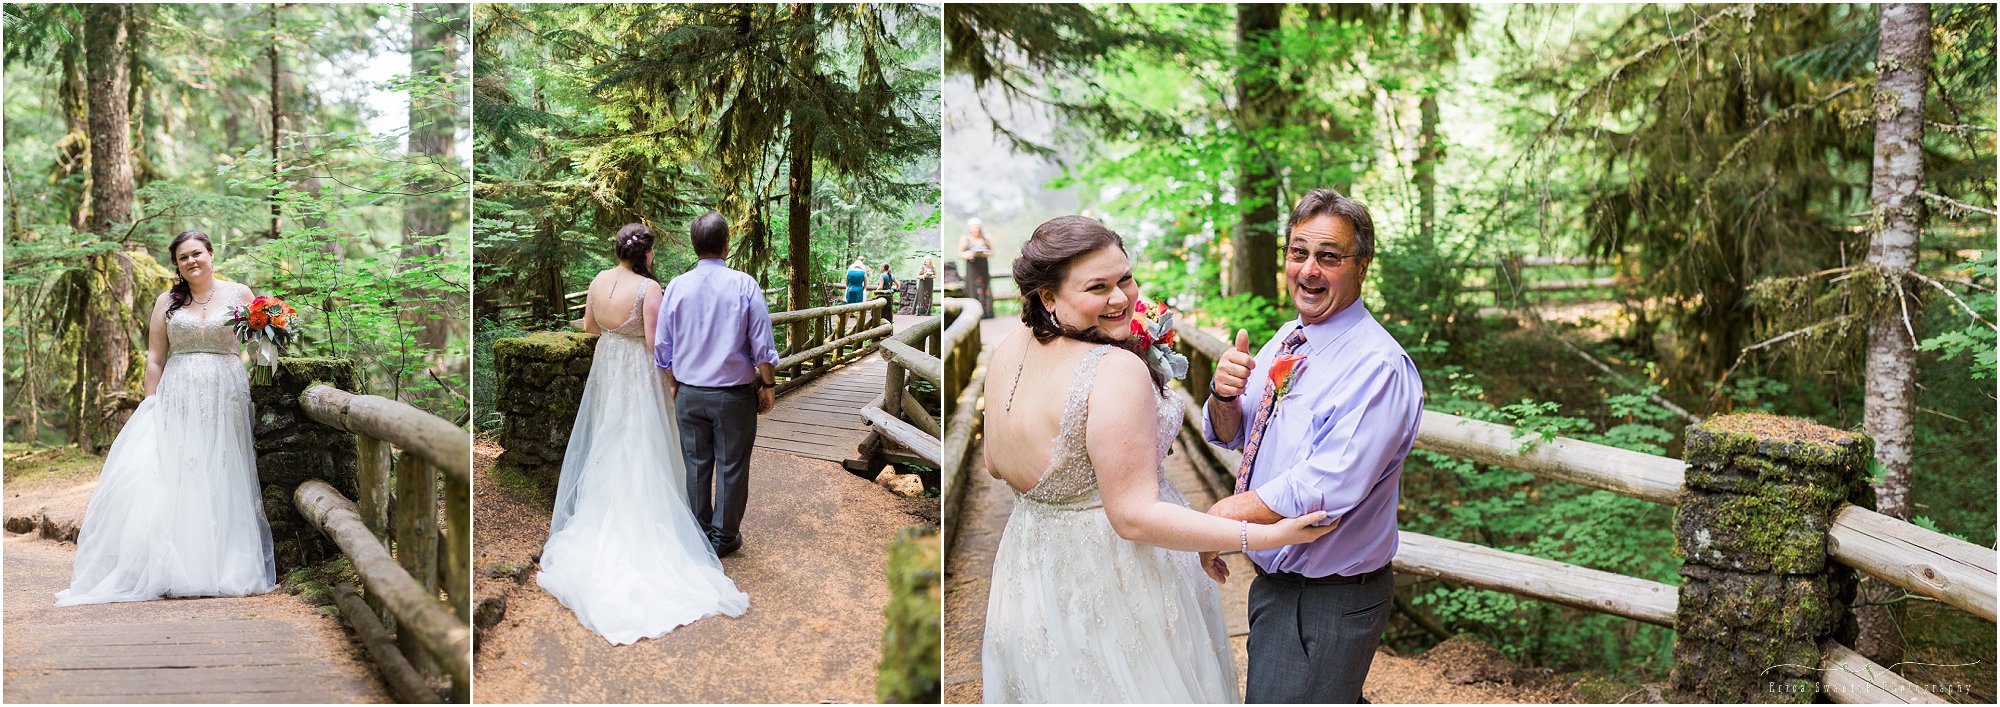 This gorgeous moss lined wooden walkway provided the perfect natural aisle for such an intimate Oregon waterfall wedding at Sahalie Falls near Bend. | Erica Swantek Photography